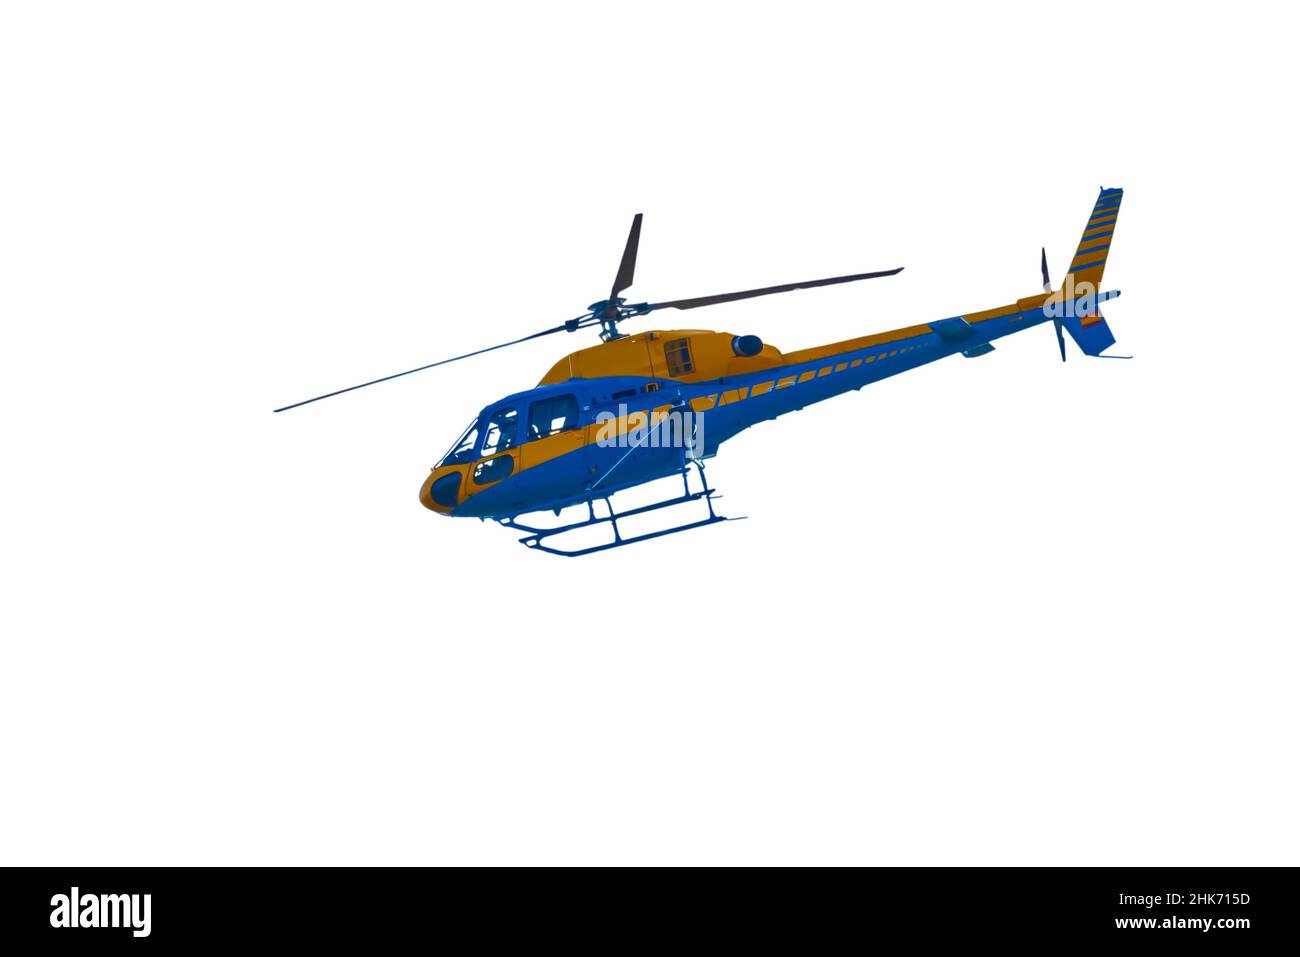 Helicopter yellow and blue isolated on white background Stock Photo